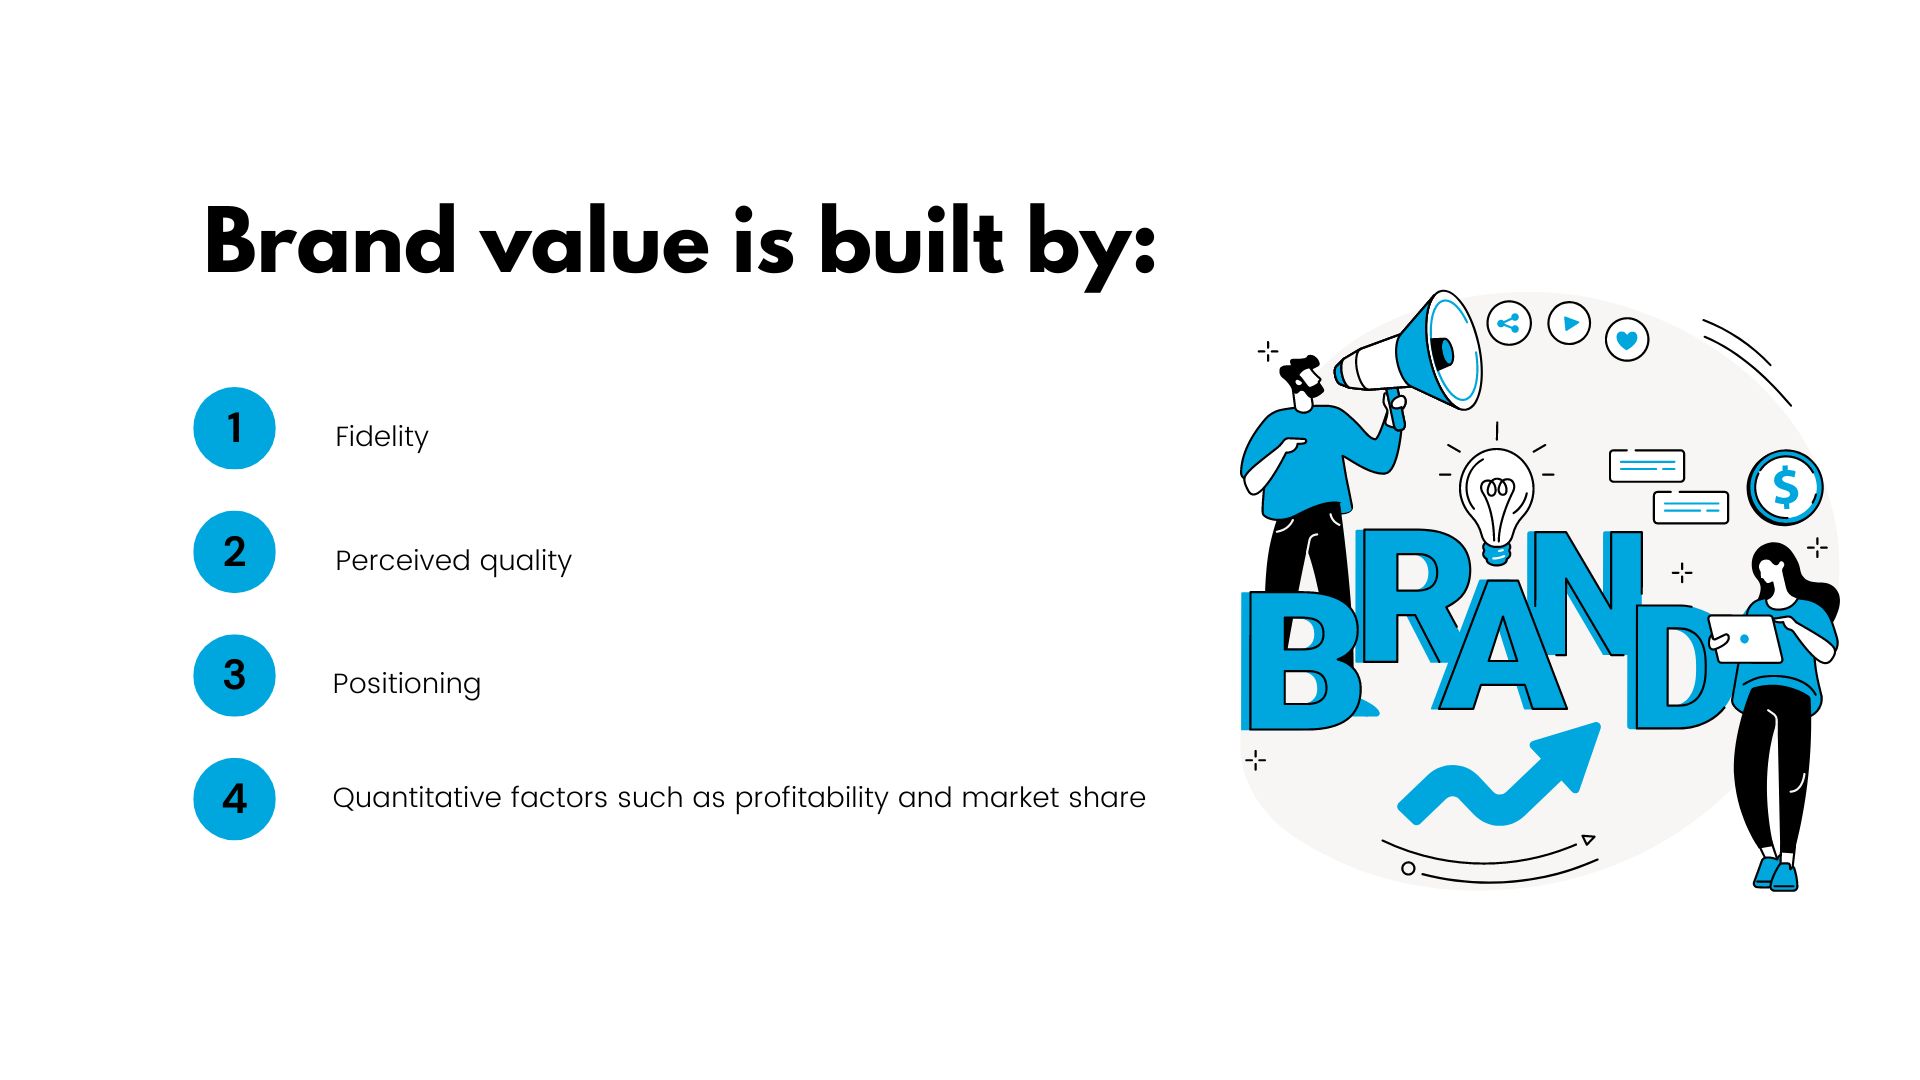 Brand value is built by: Fidelity Perceived quality positioning Quantitative factors such as profitability and market share